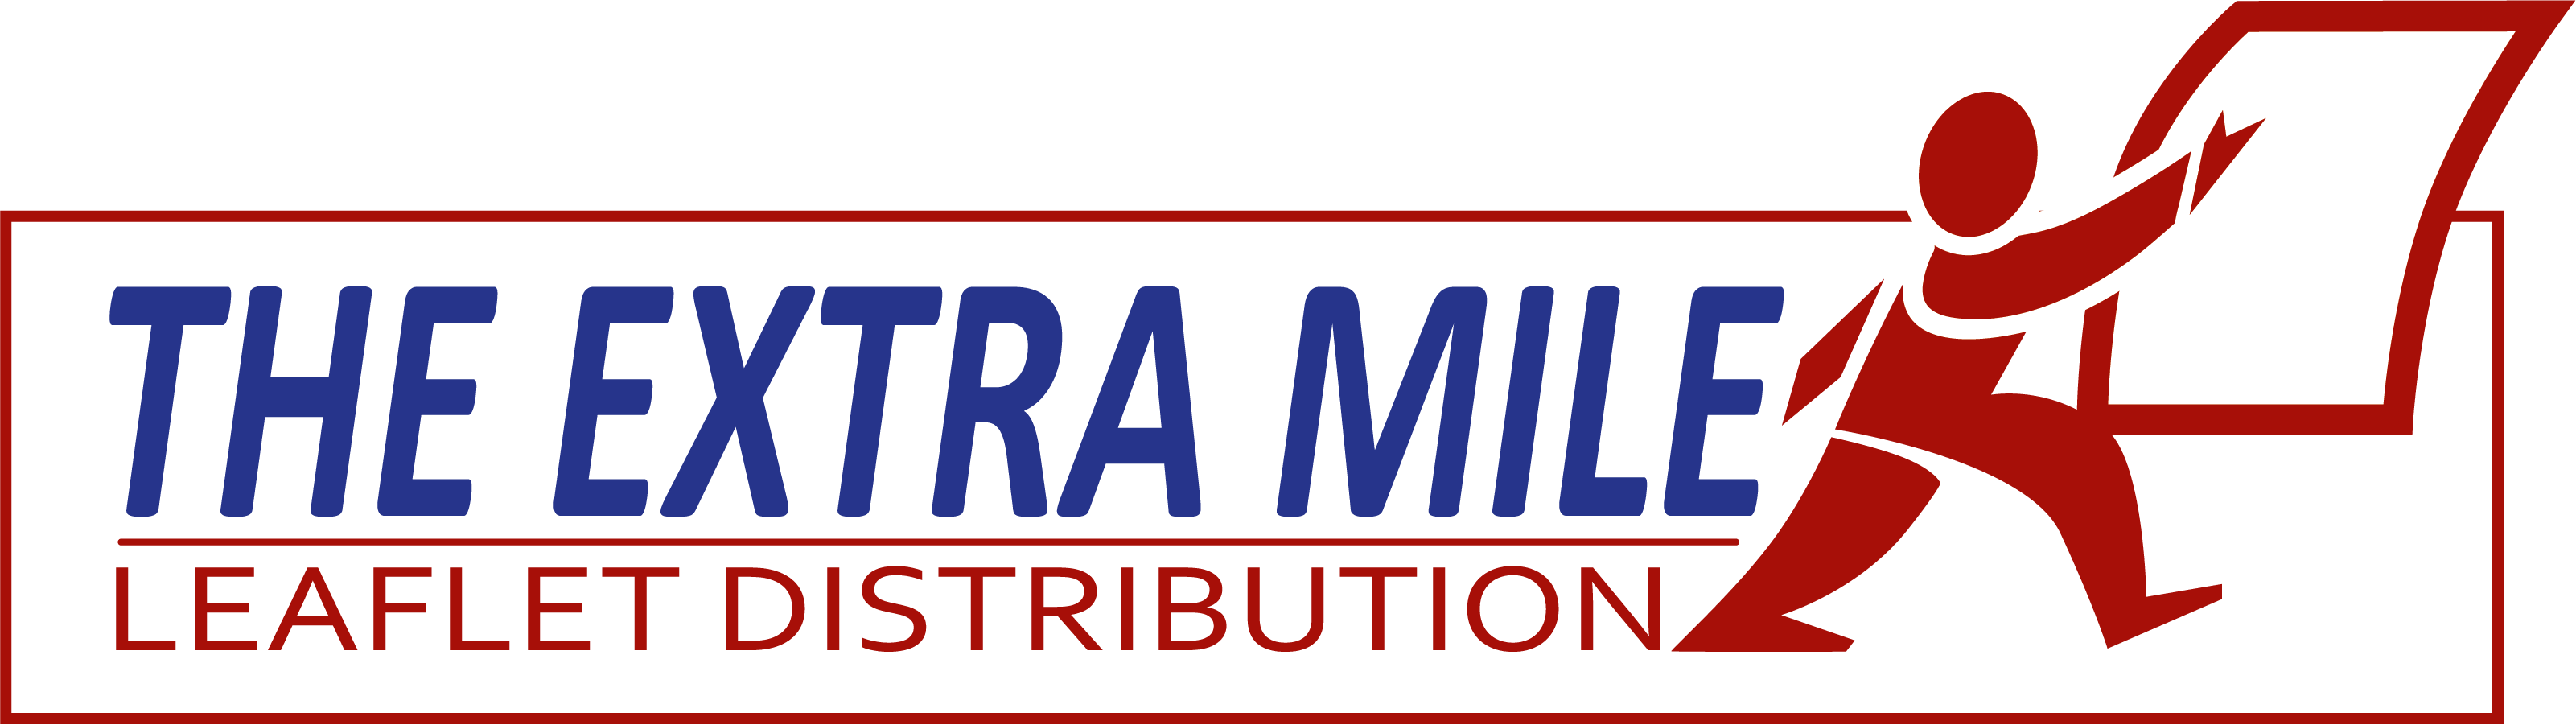 Logo of The Extra Mile Leaflet Distribution Delivery Services In Farnborough, Hampshire